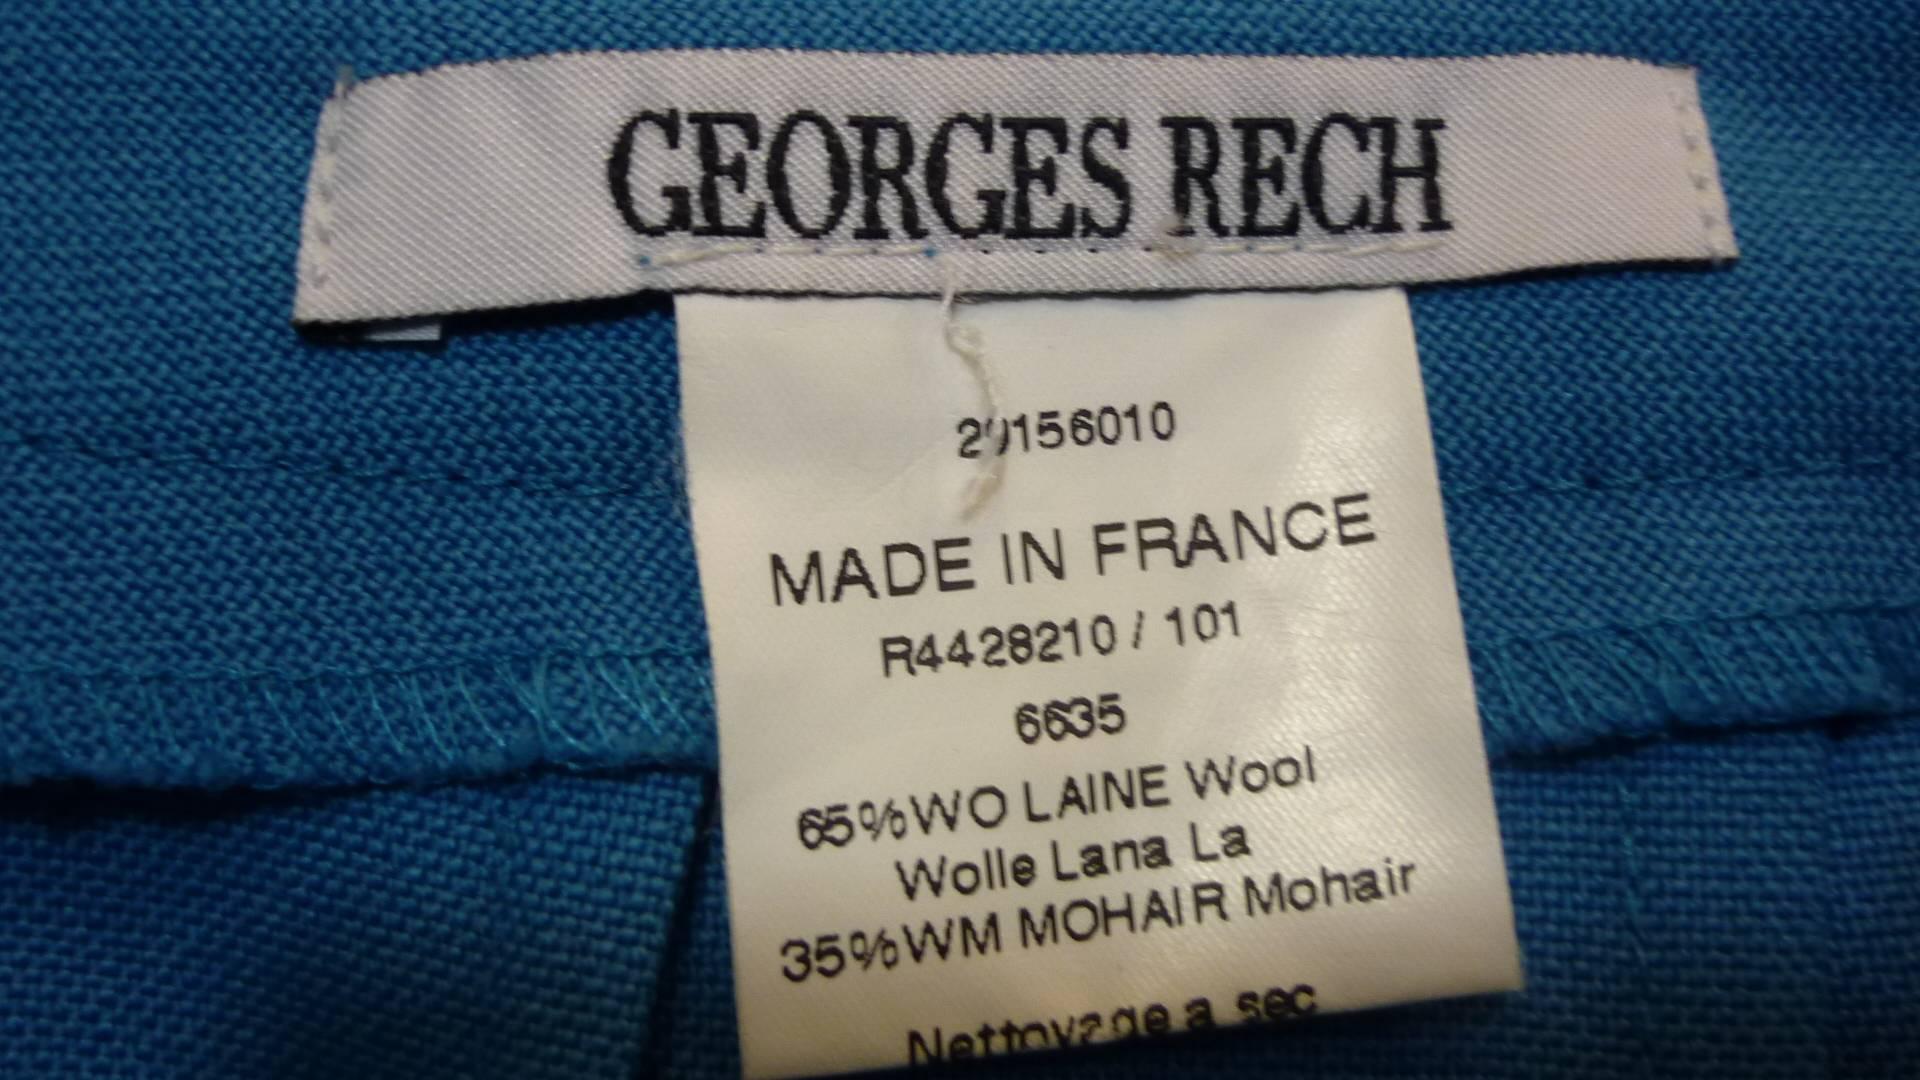 Georges Rech Aqua Blue Wool and Mohair Skirt Suit 2